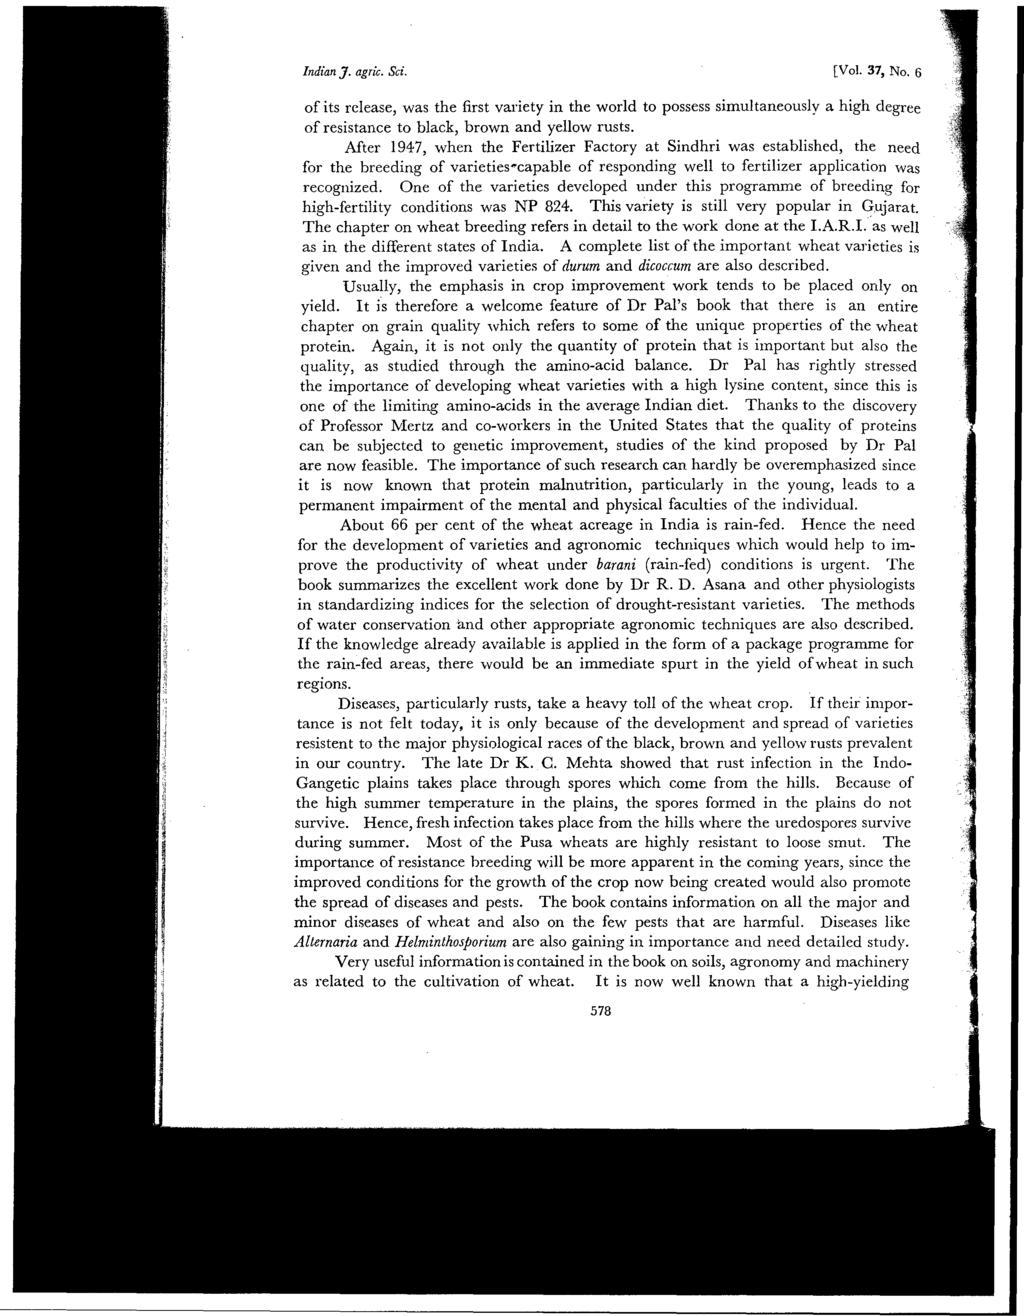 Indian J. agric. Sci. [Vol. 37, NO.6 of its release, was the first variety in the world to possess simultaneously a high degree of resistance to black, brown and yellow rusts.